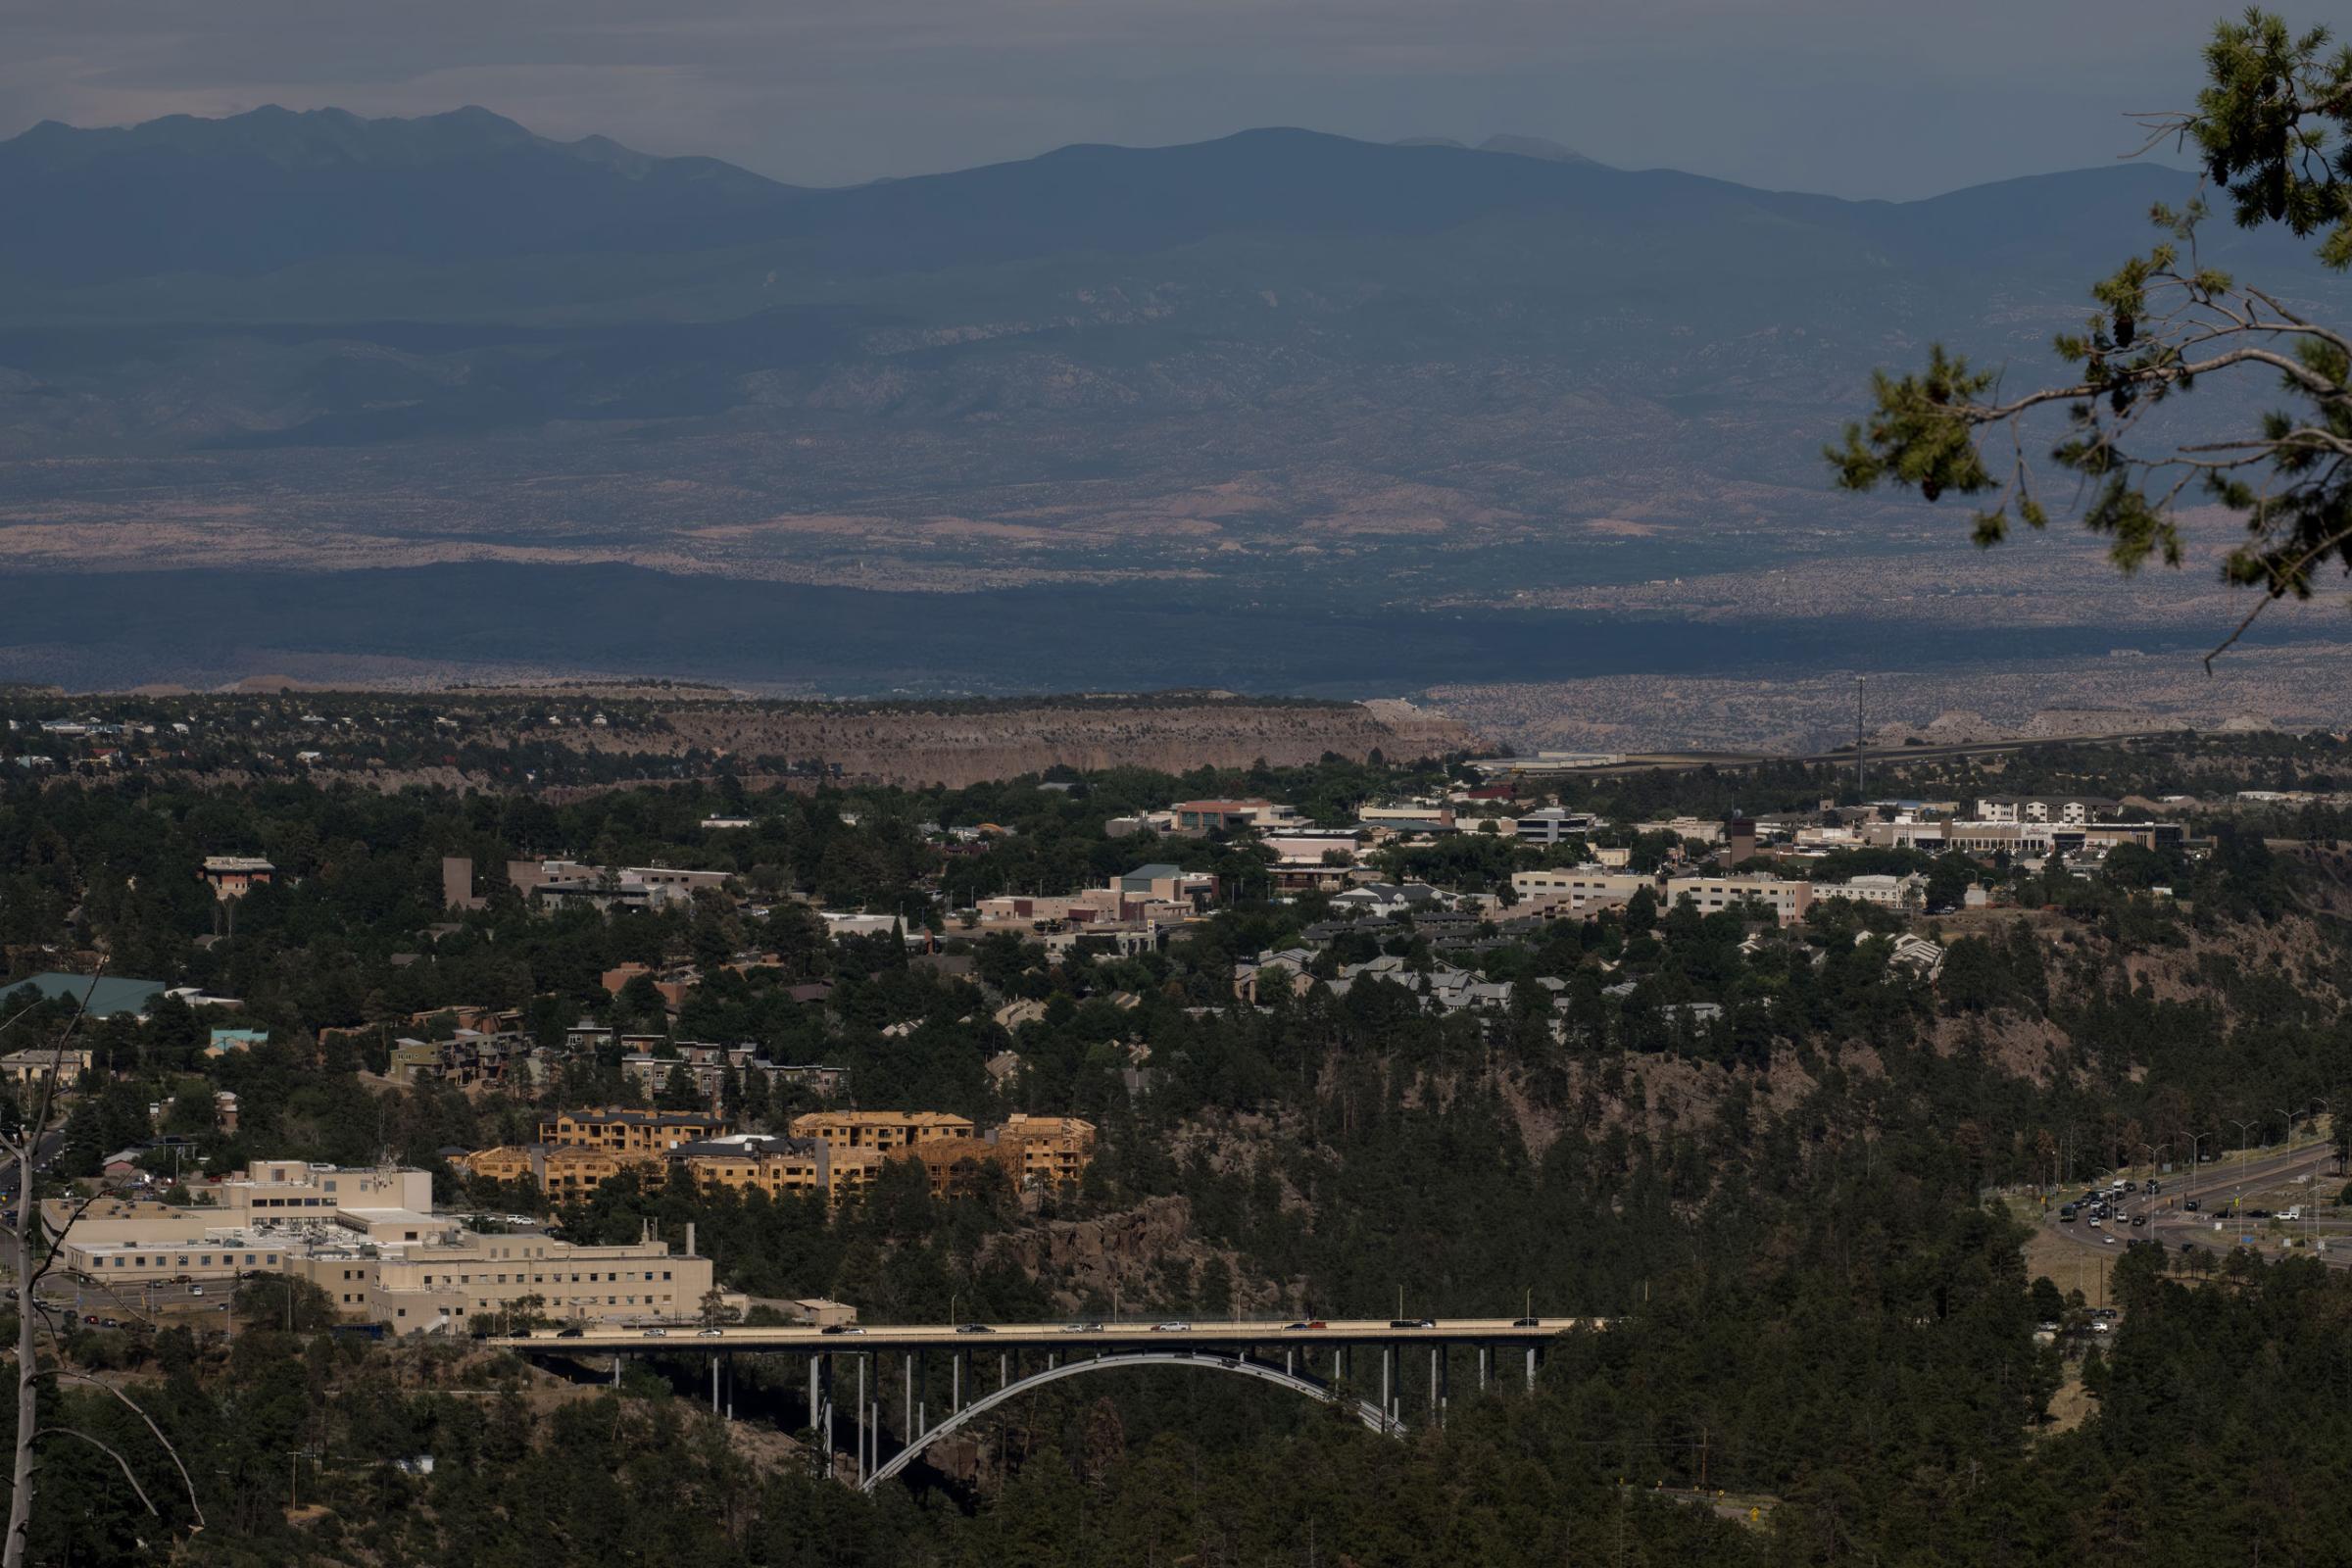 view from a ridge overlooking Los Alamos